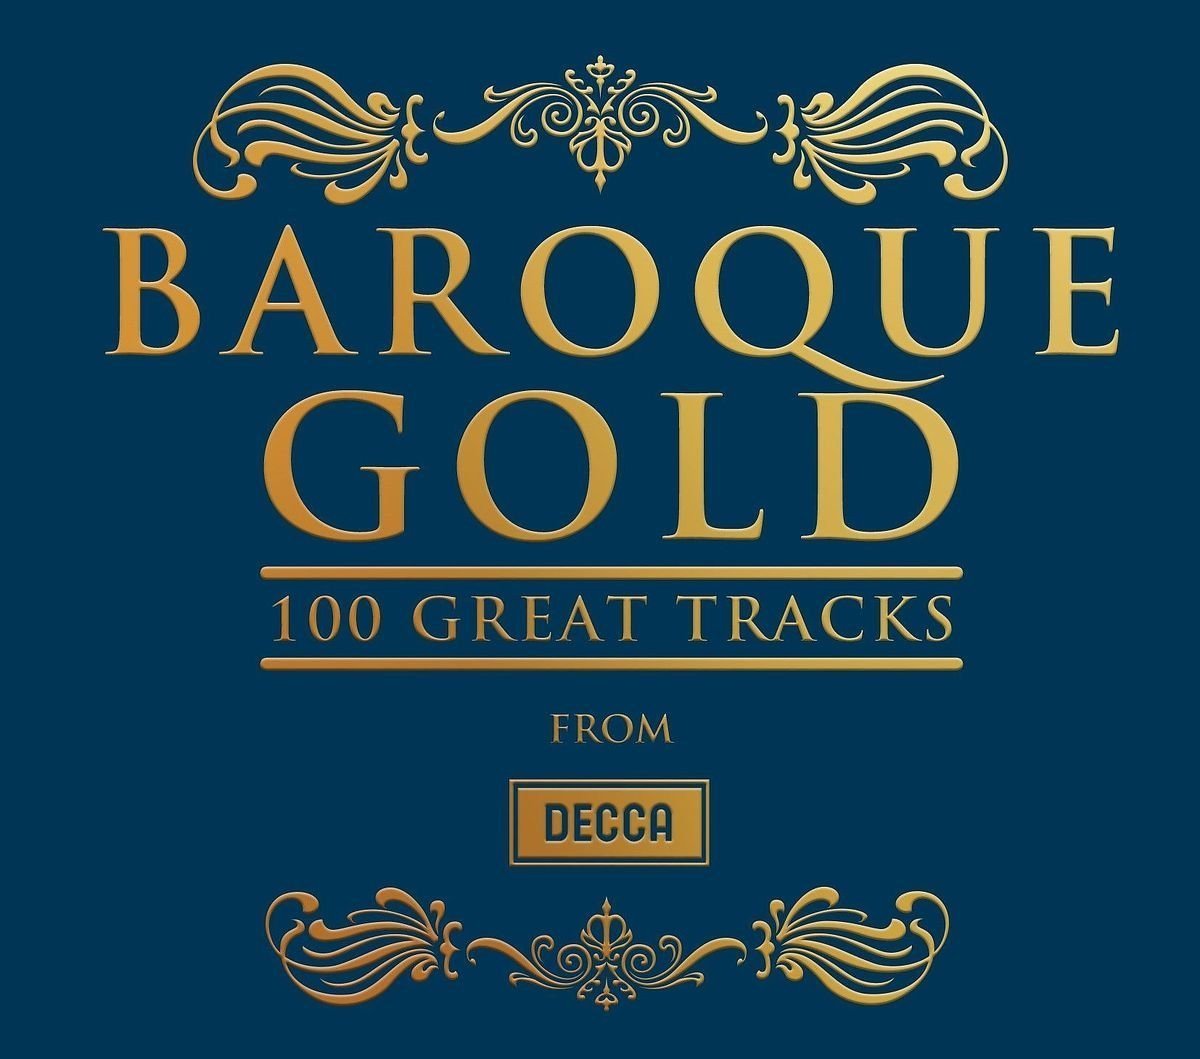 BAROQUE GOLD: 100 GREAT TRACKS (6 CDs)